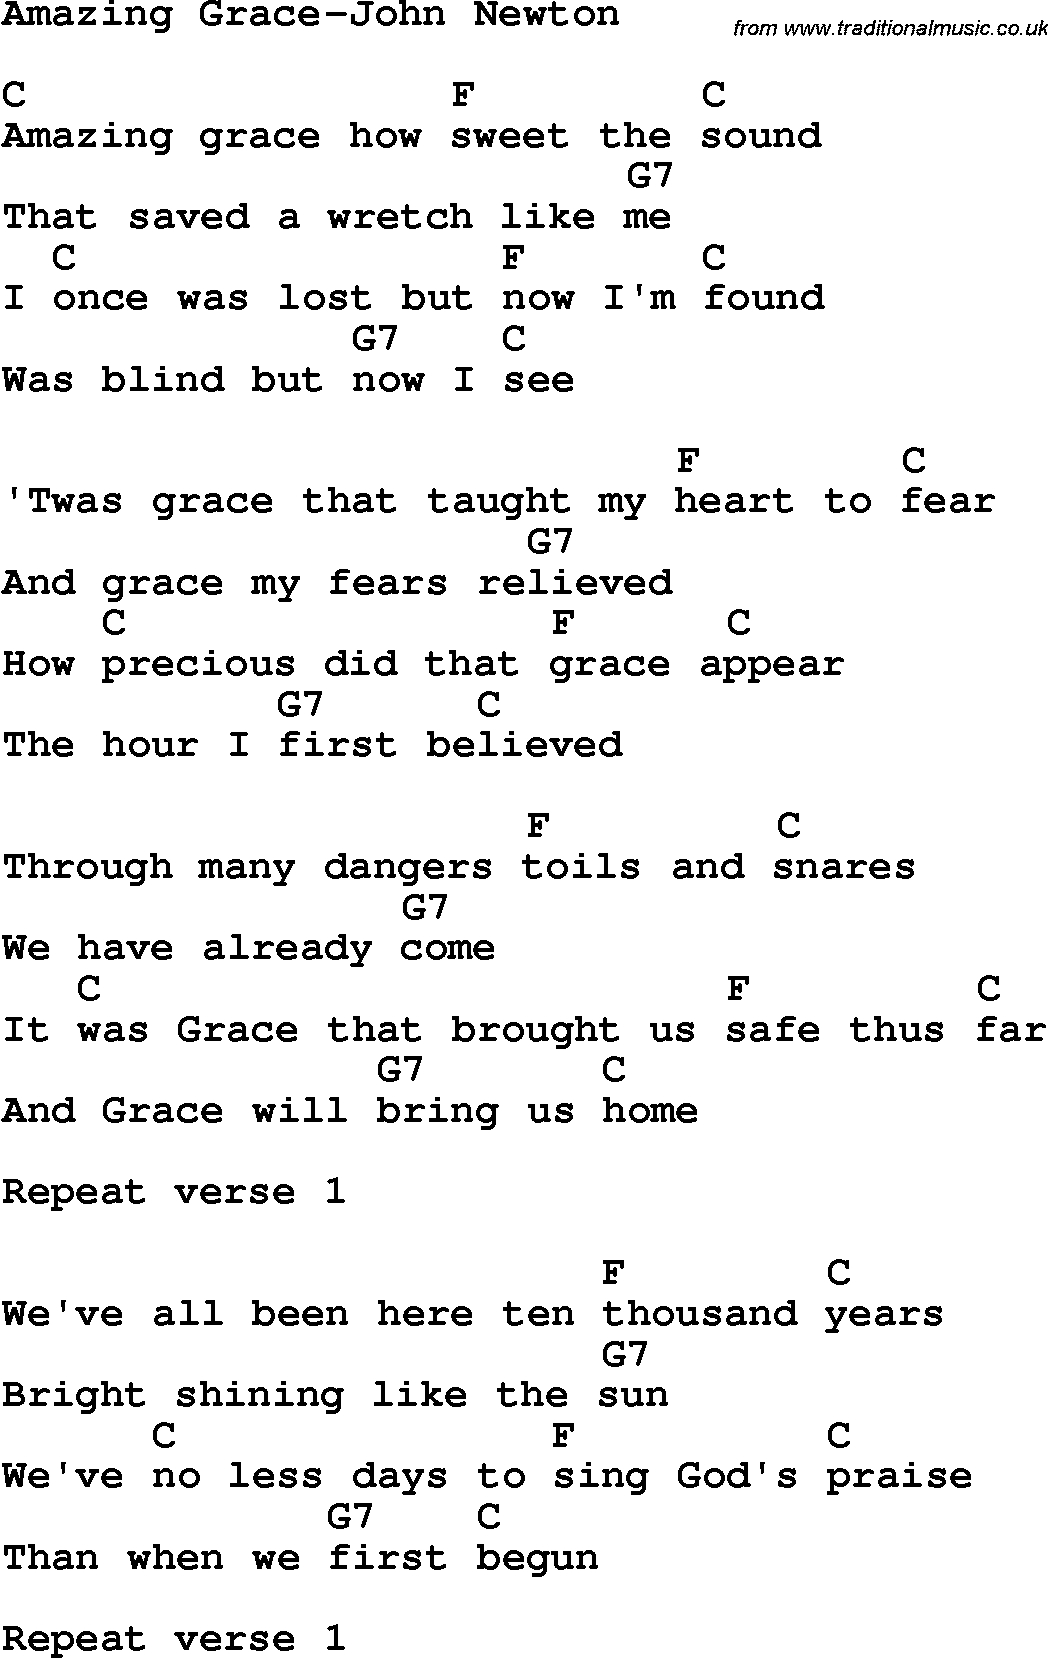 Amazing Grace Chords Country Southern And Bluegrass Gospel Song Amazing Grace John